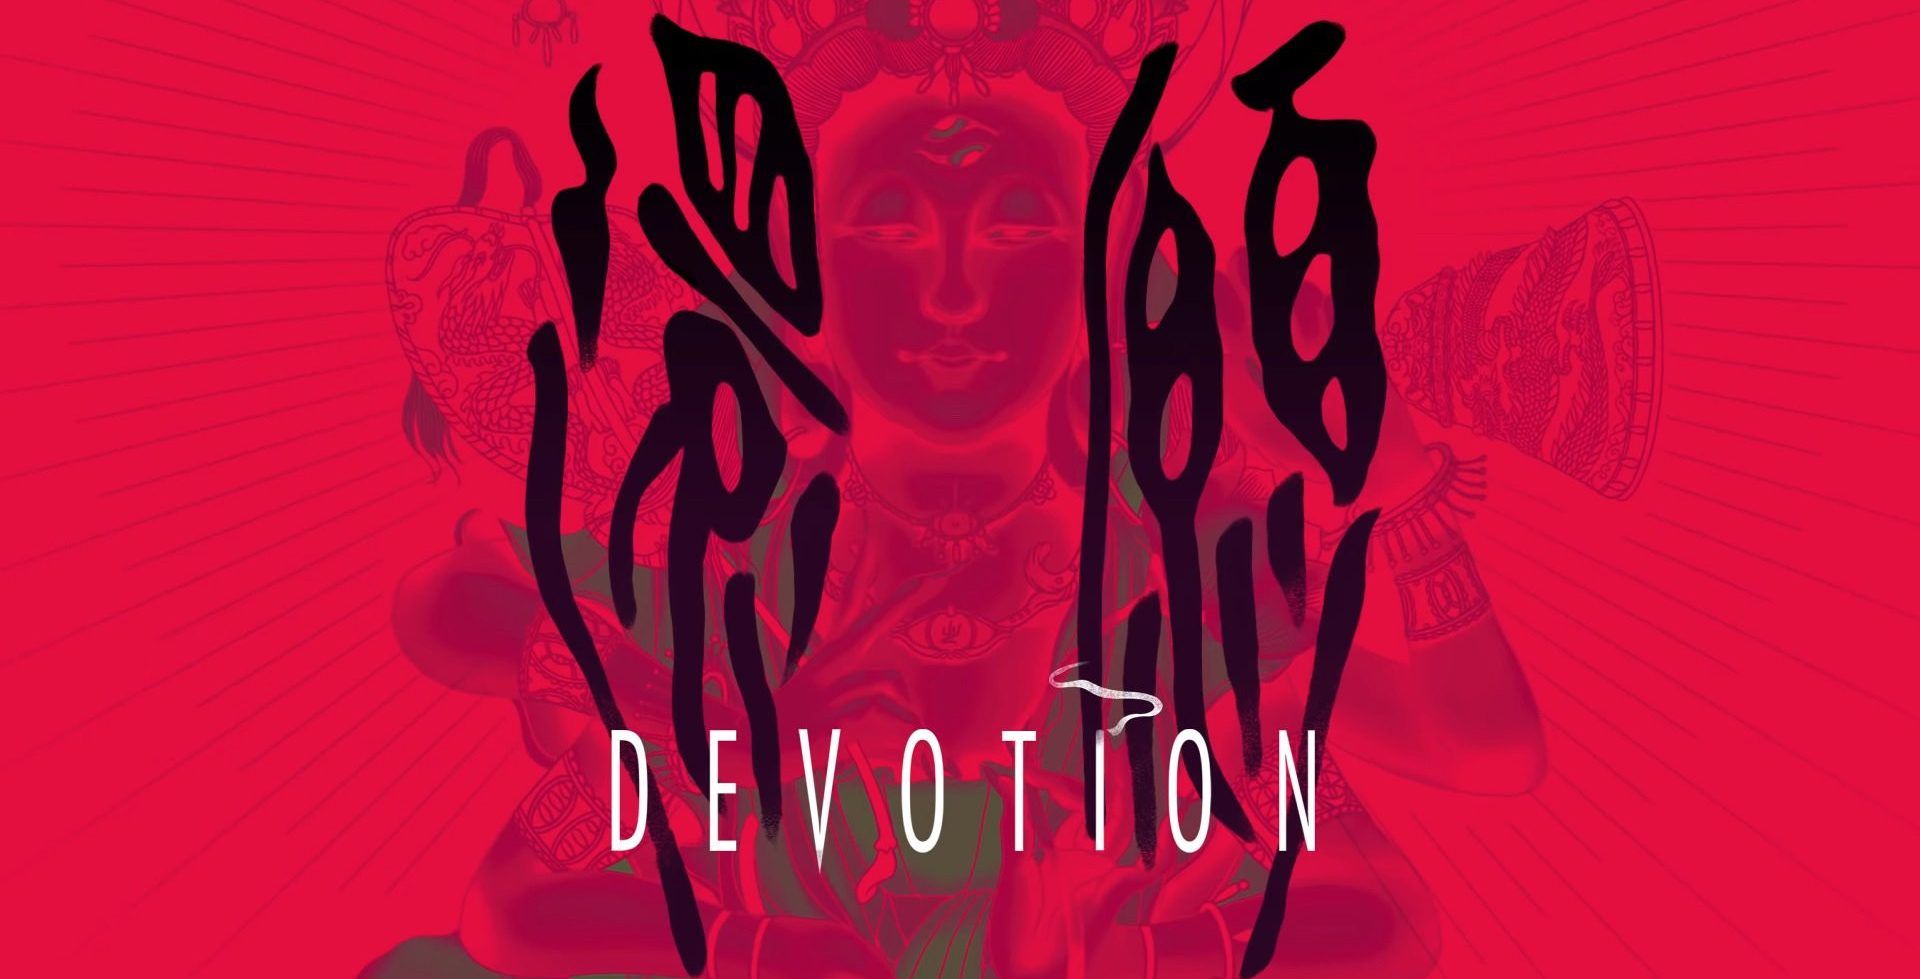 Devotion cover image without girl in frame